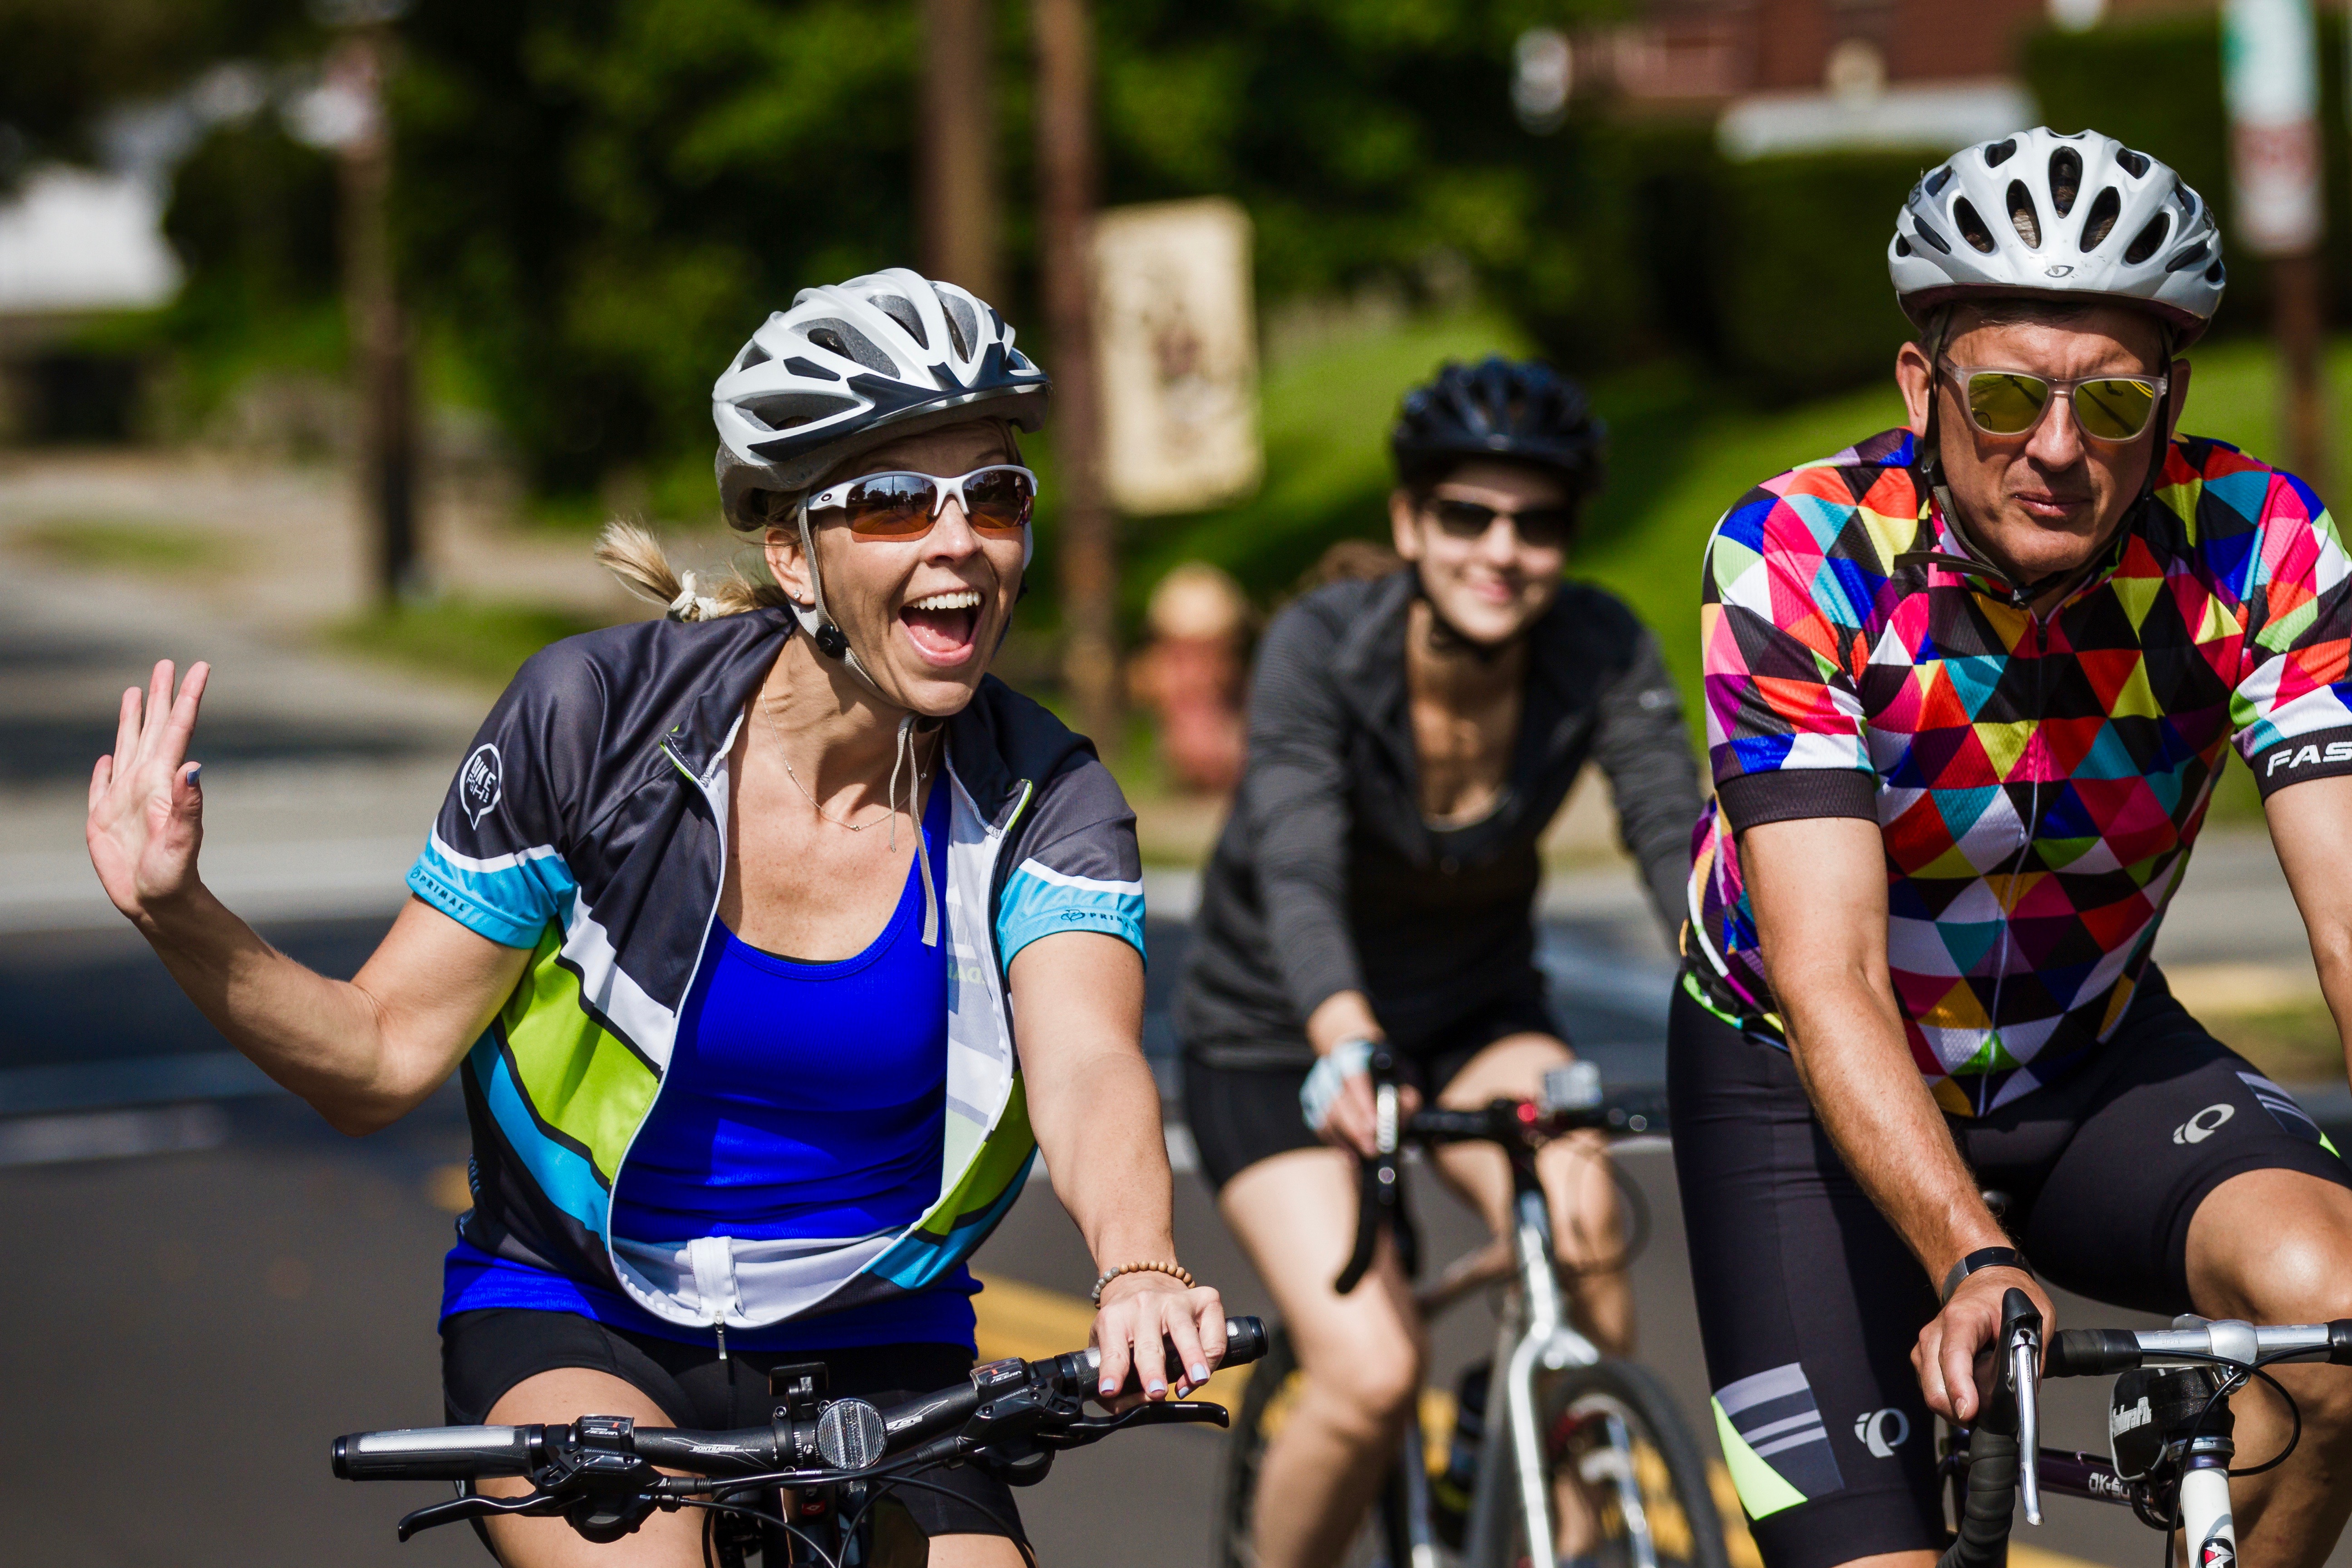 PedalPGH has group rides for all ages, fitness levels, and senses of humor.